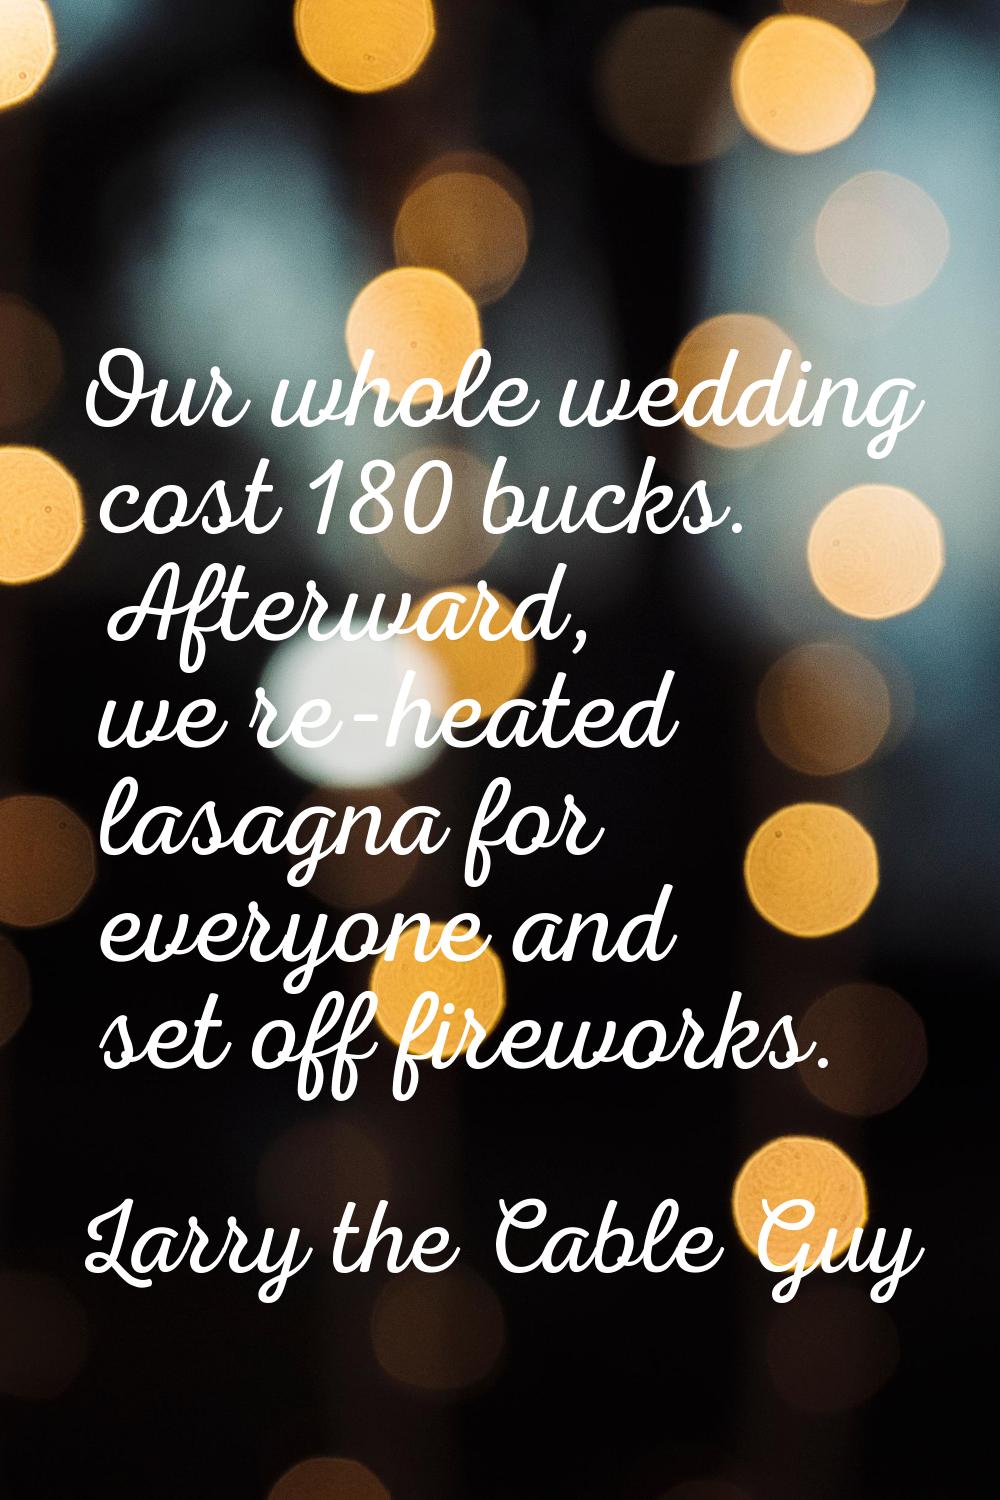 Our whole wedding cost 180 bucks. Afterward, we re-heated lasagna for everyone and set off firework